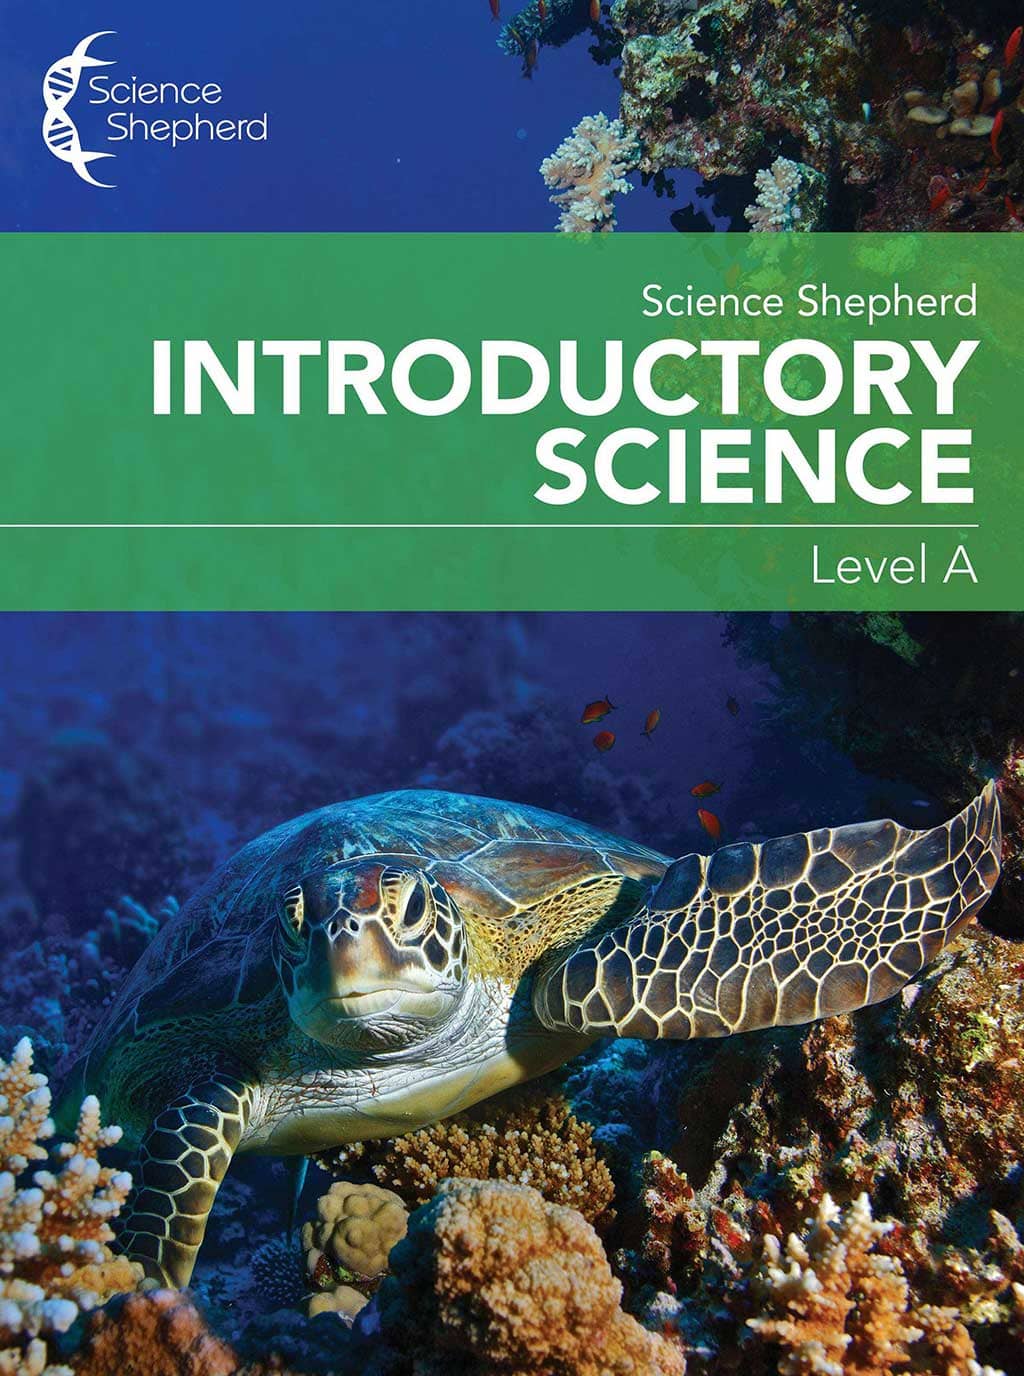 Science Shepherd Introductory Science homeschool workbook Level A cover of a turtle and coral reef